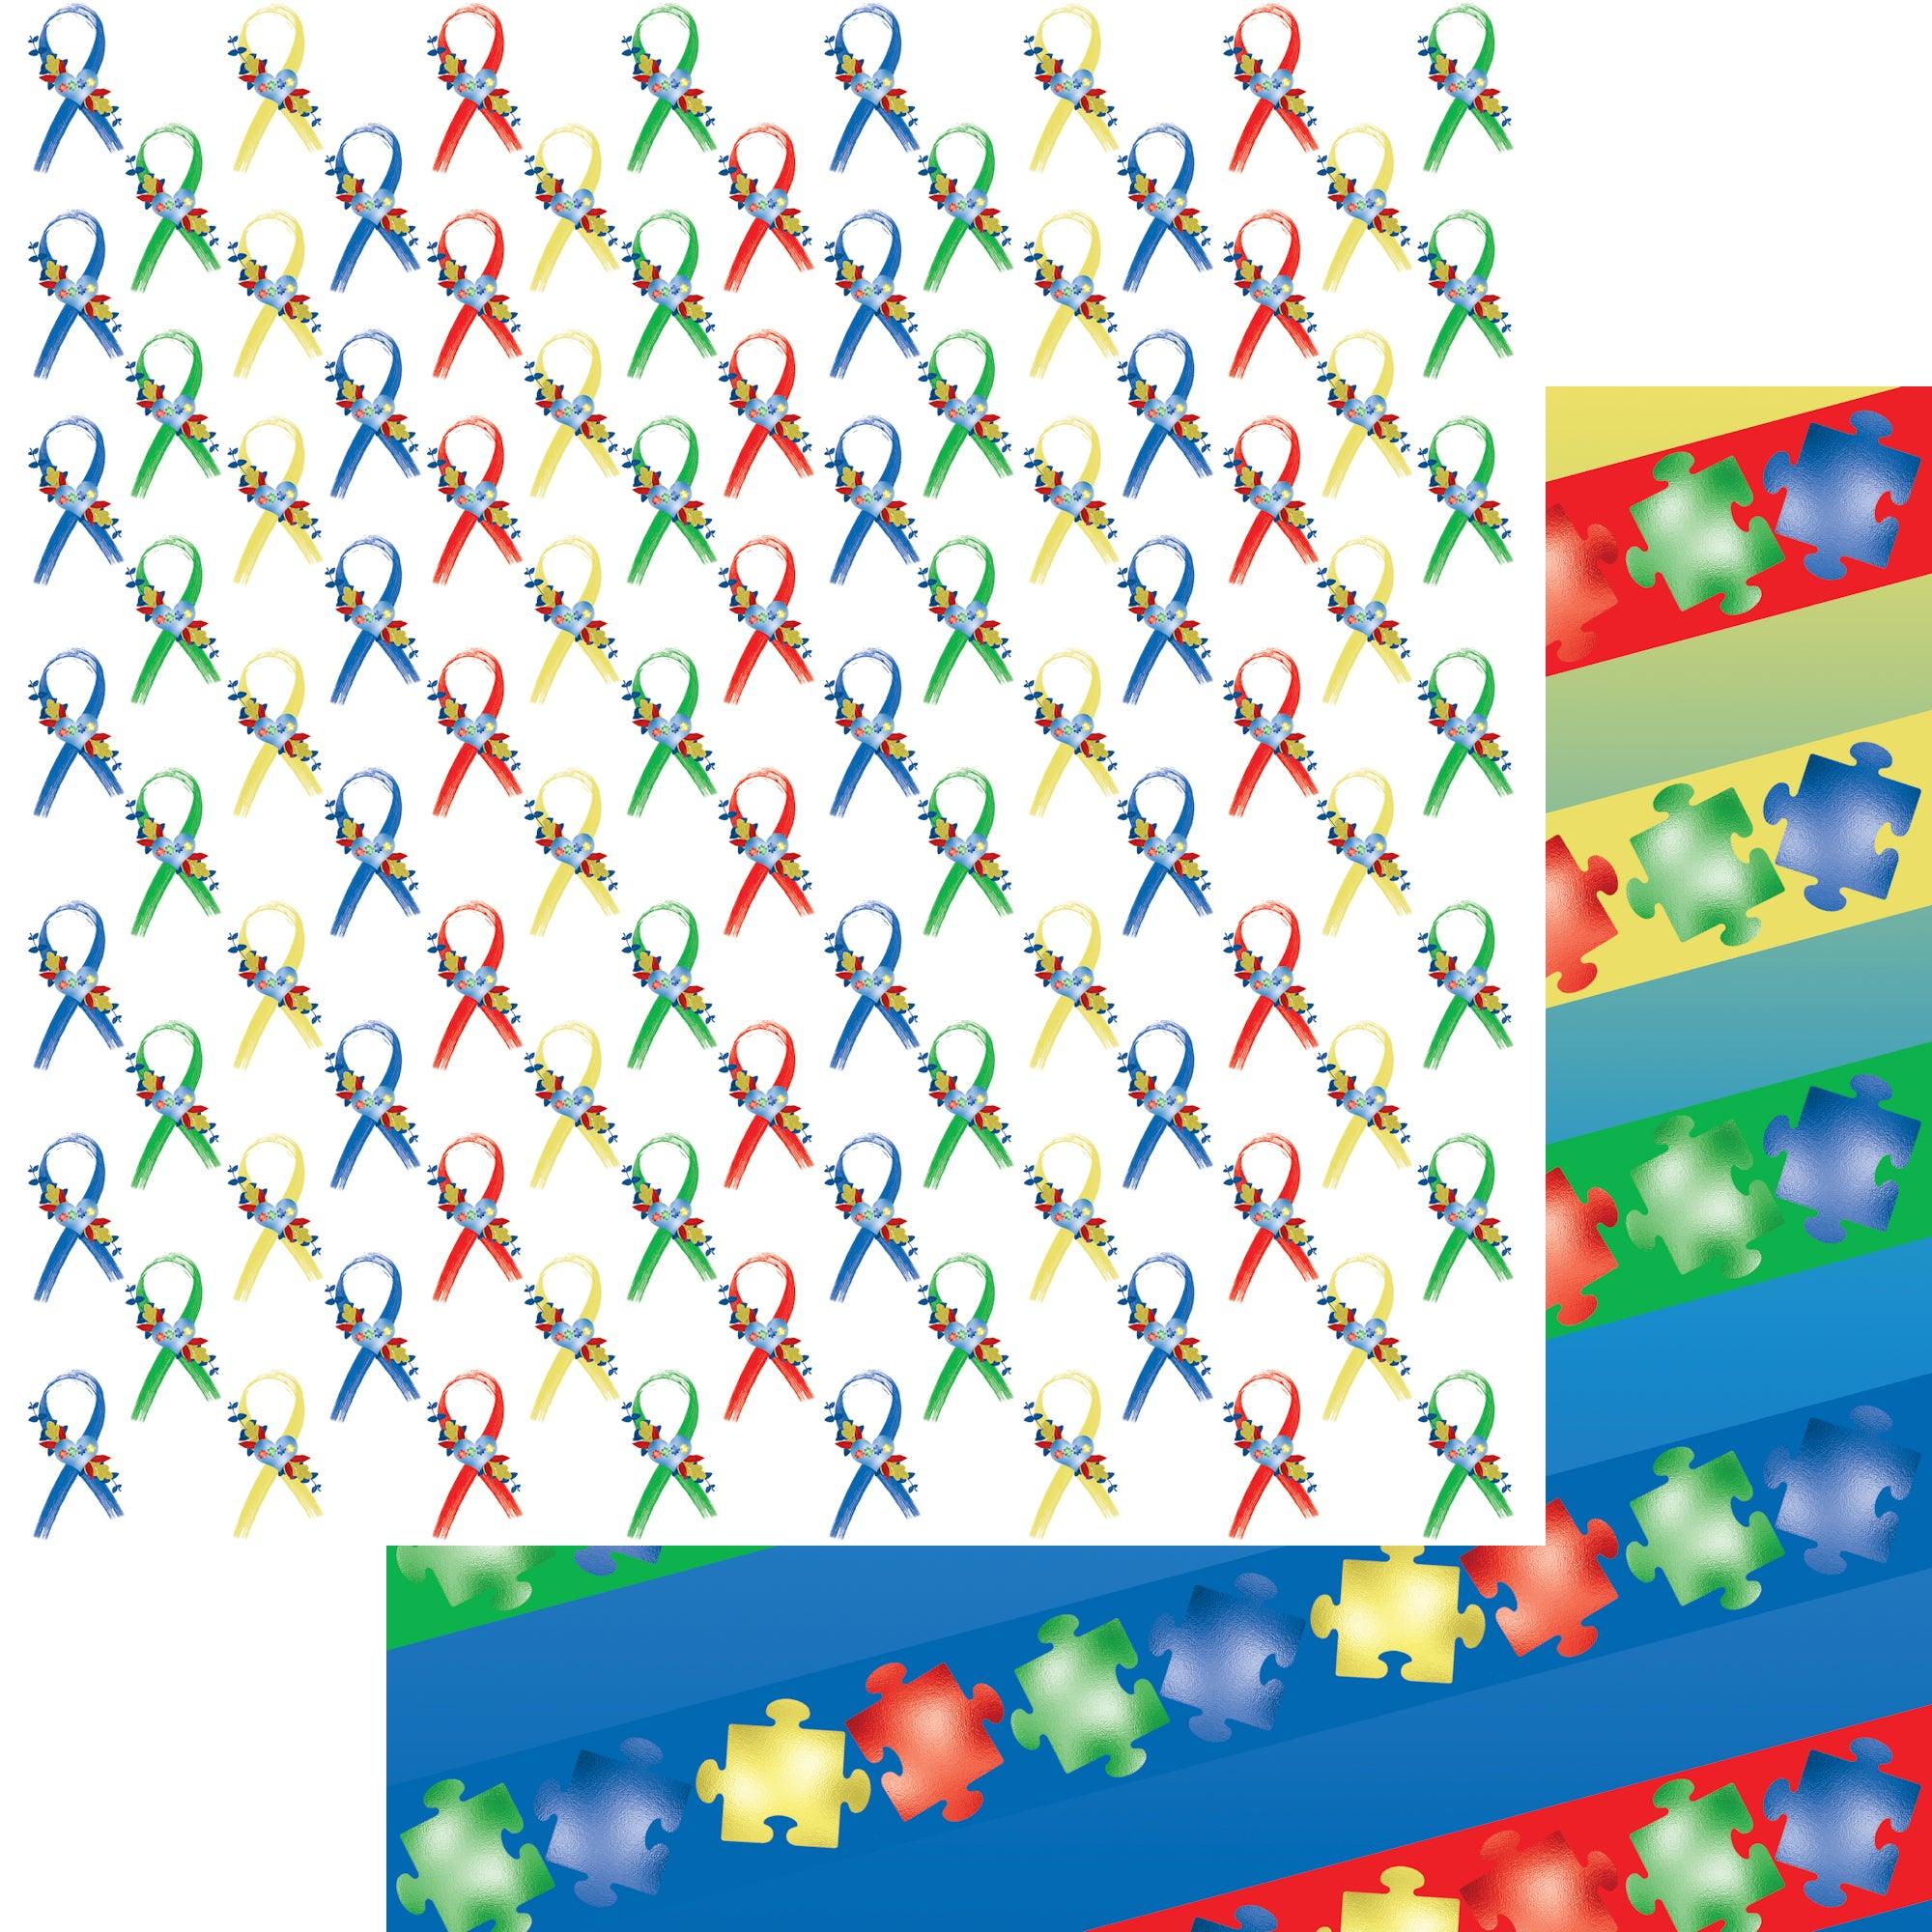 Autism Au-some Collection Puzzle Ribbon 12 x 12 Double-Sided Scrapbook Paper by SSC Designs - Scrapbook Supply Companies